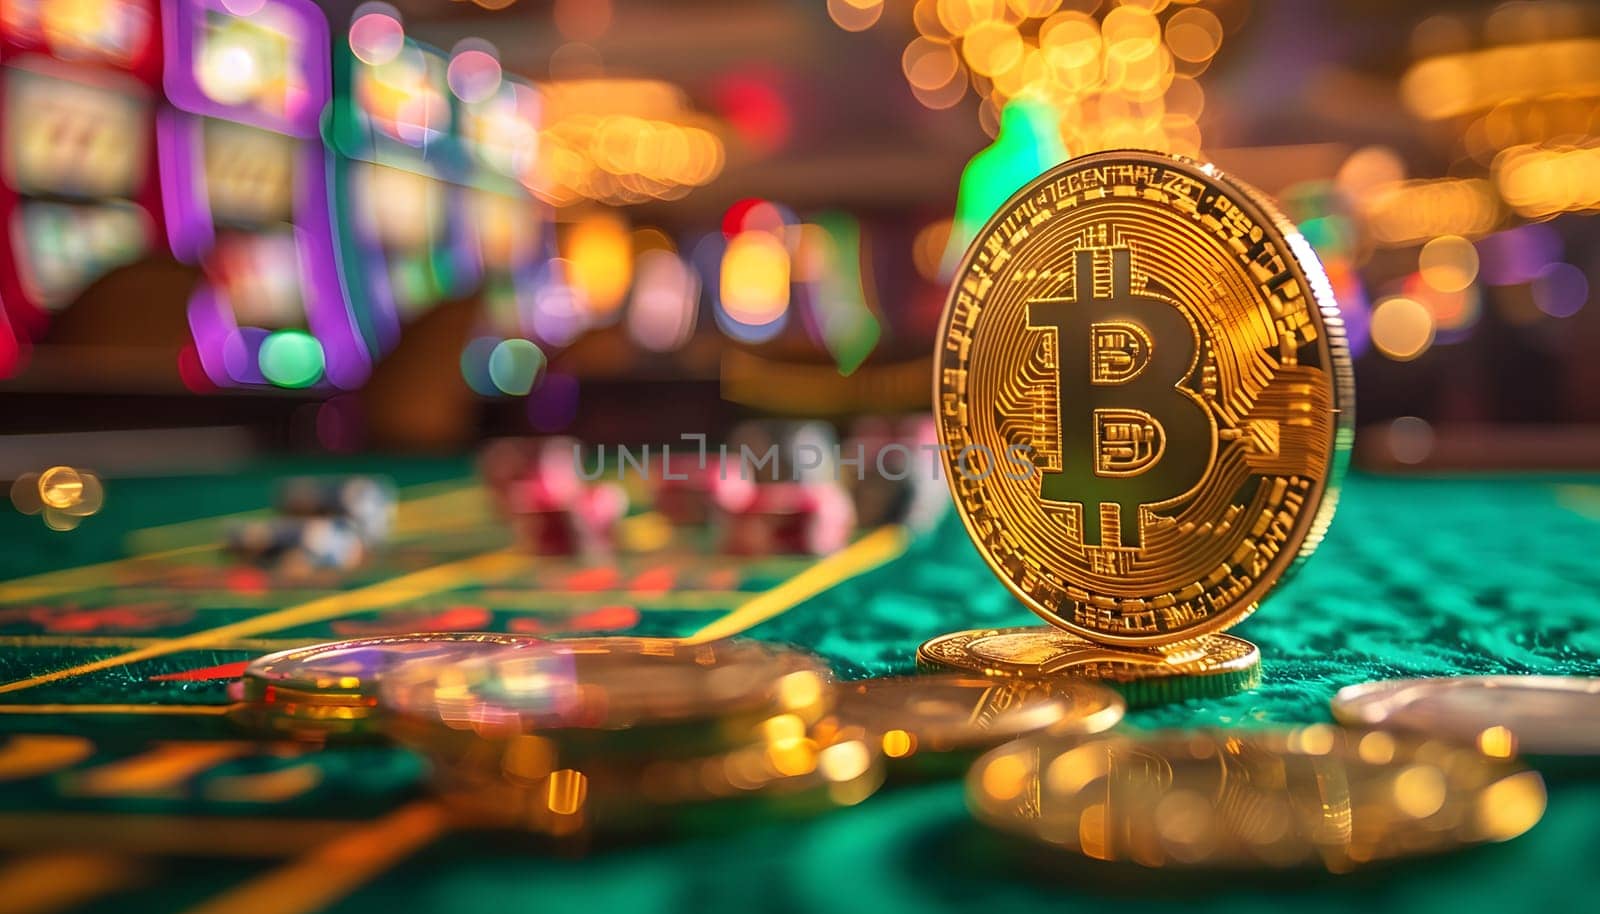 In the vibrant city, a colorful bitcoin is placed on a stack of poker chips at a lively casino event. The glass table reflects the fun games and fashion accessories of the night